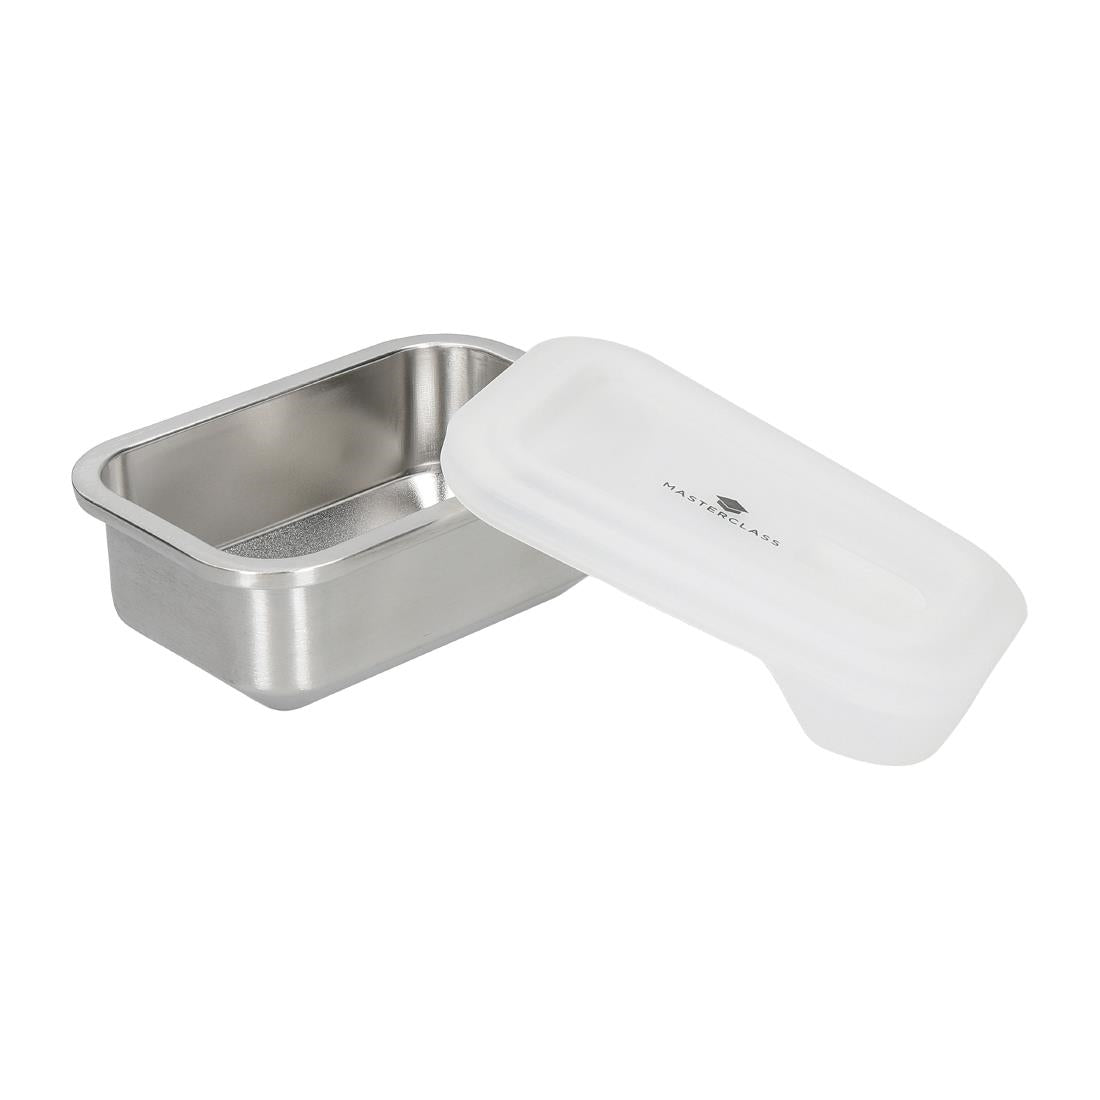 FW783 Masterclass All-in-One Stainless Steel Food Storage Dish 500ml JD Catering Equipment Solutions Ltd